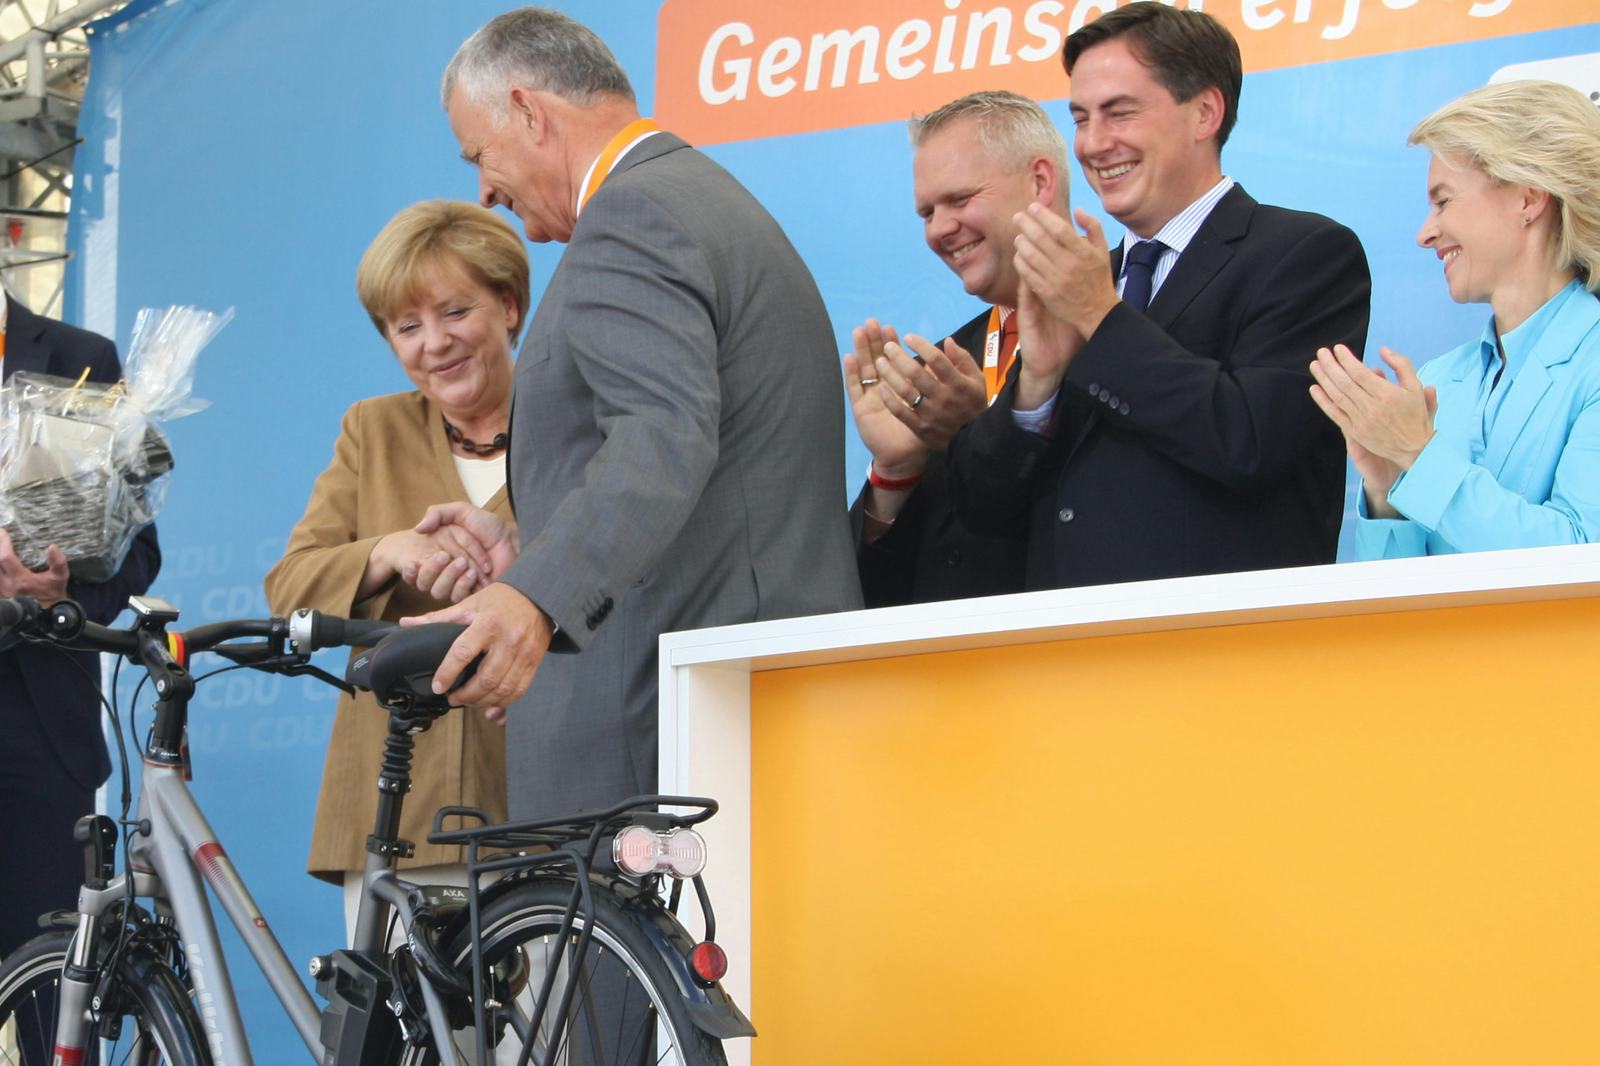 District Administrator Hans Eveslage hands over the new chancellery office e-bike to German Chancellor Angela Merkel. – Photo Derby Cycle.